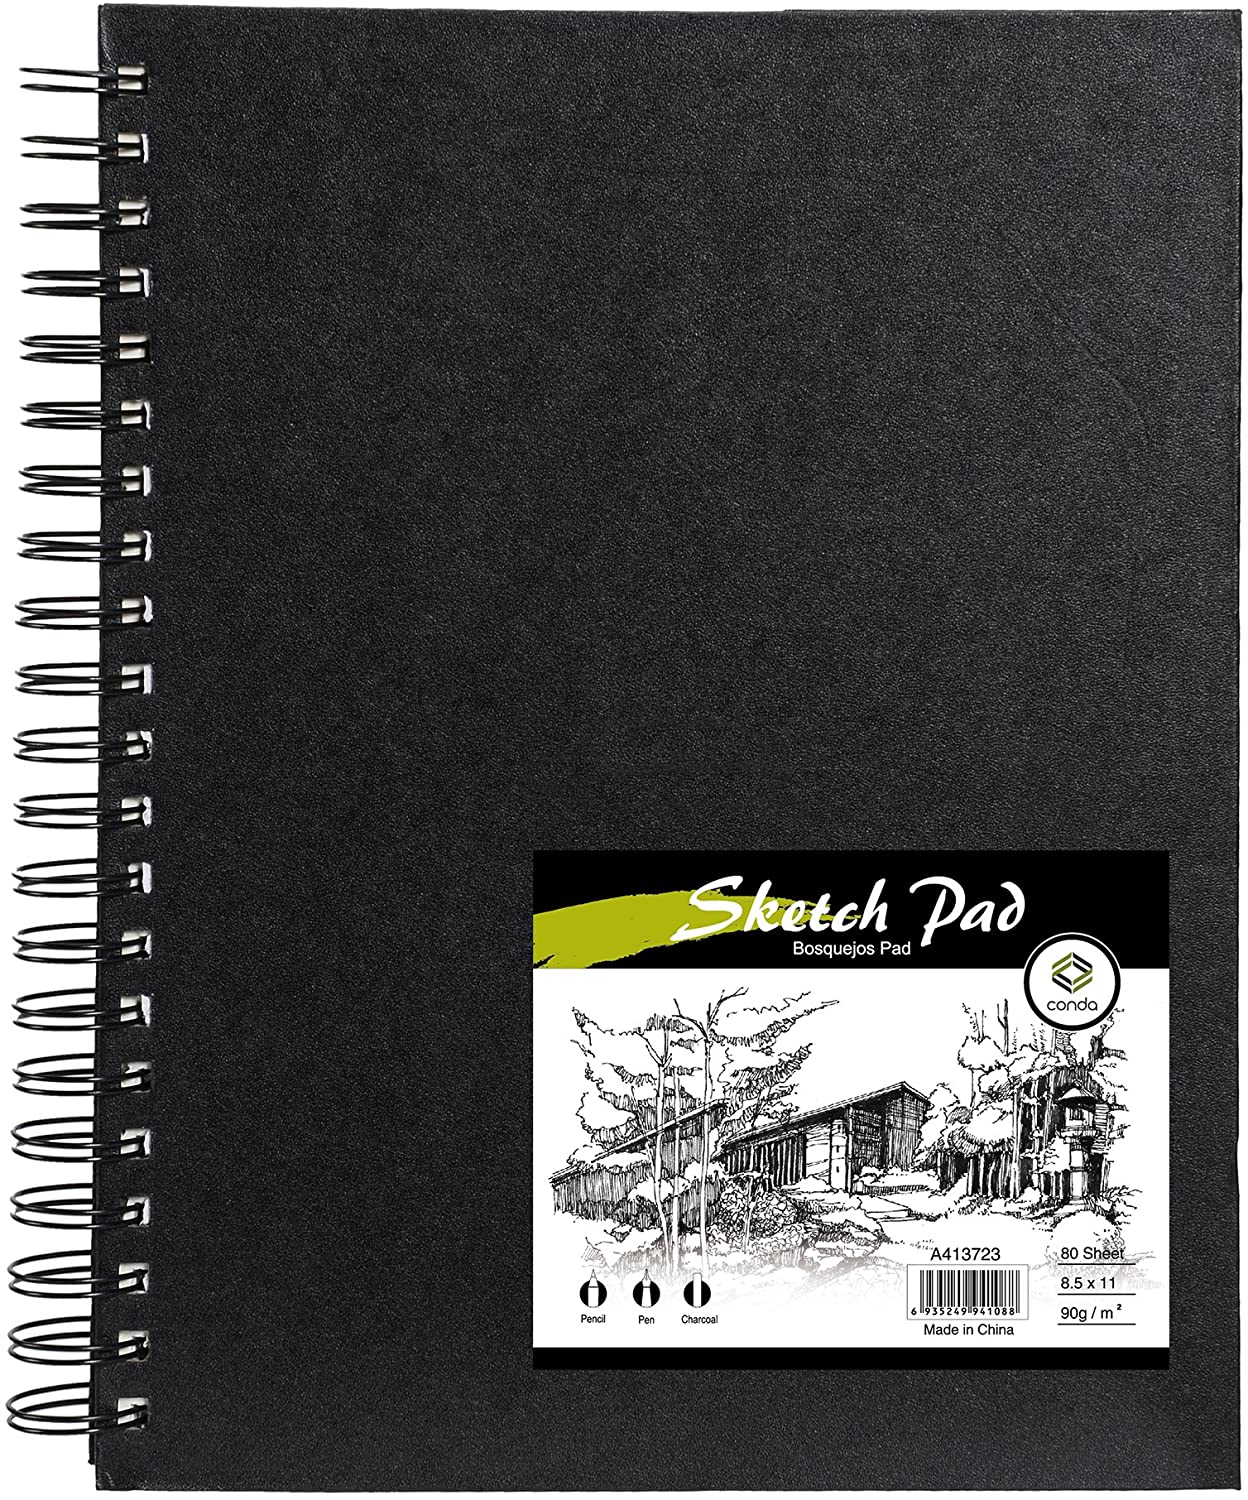 US Art Supply 5.5 x 8.5 Top Spiral Bound Sketch Book Pad, Pack of 2, 100  Sheets Each, 60lb (100gsm) - Artist Sketching Drawing Pad, Acid-Free 